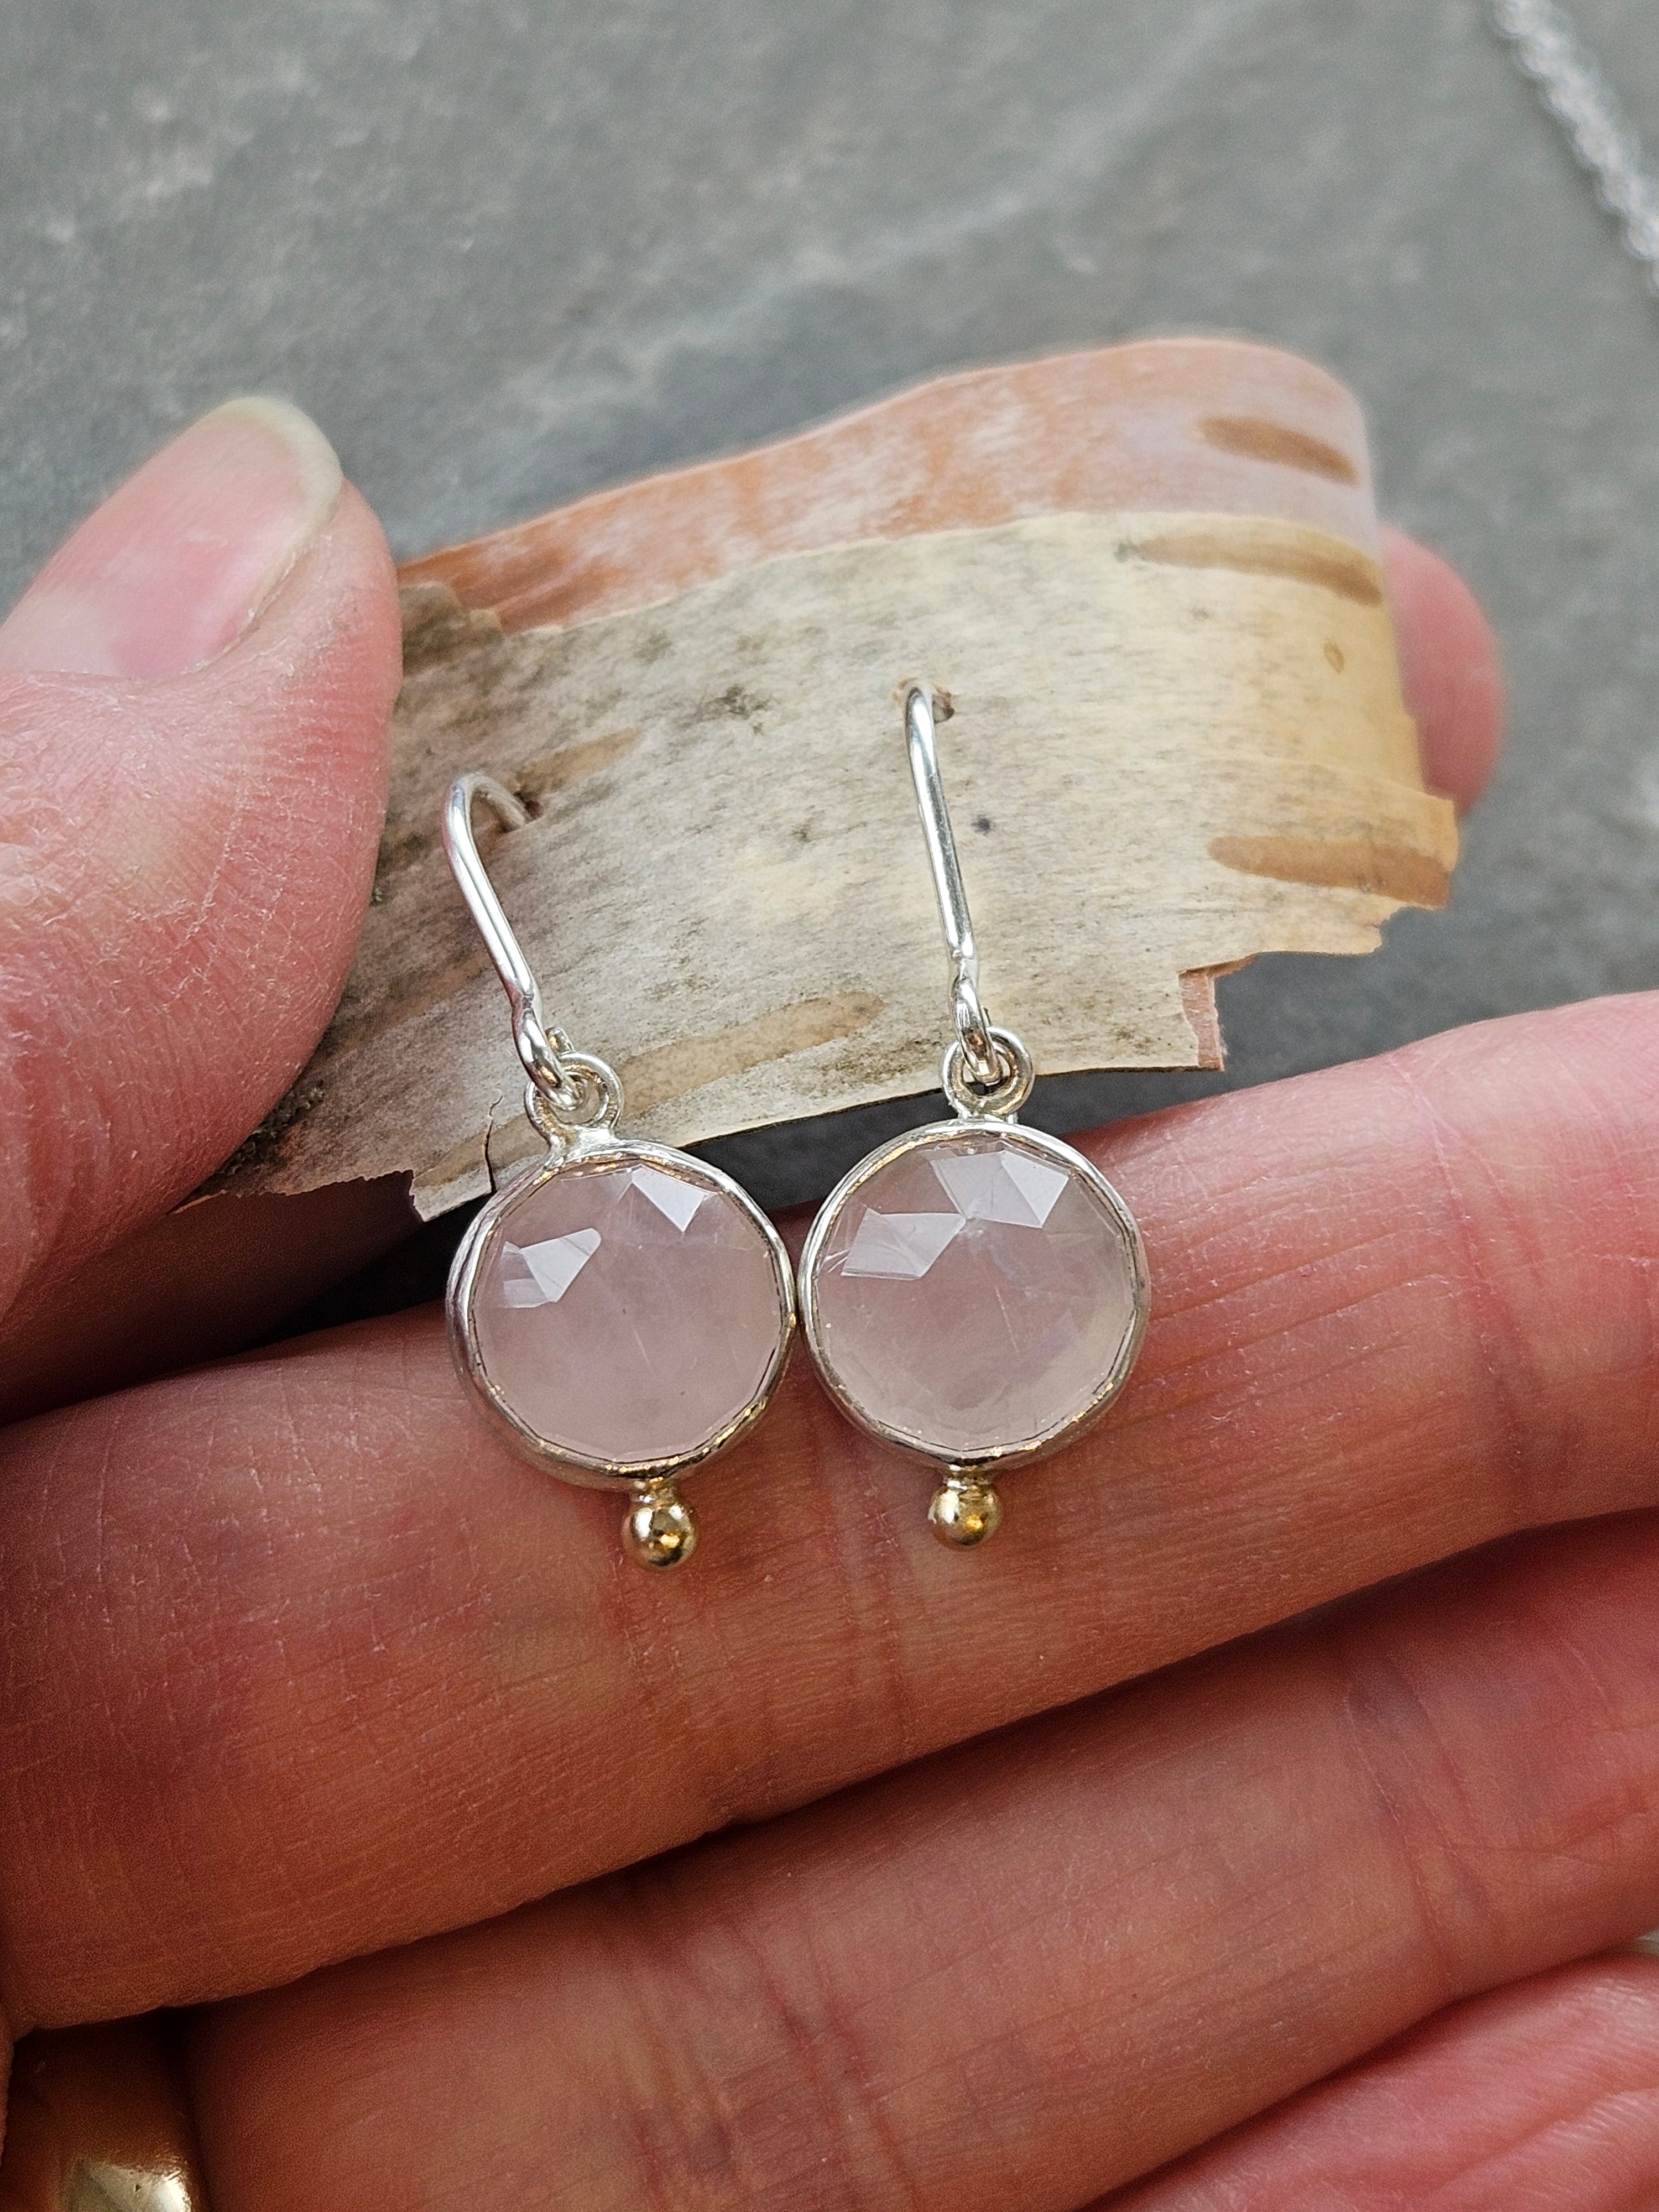 Rose quartz in Sterling silver and 18k gold accents earrings